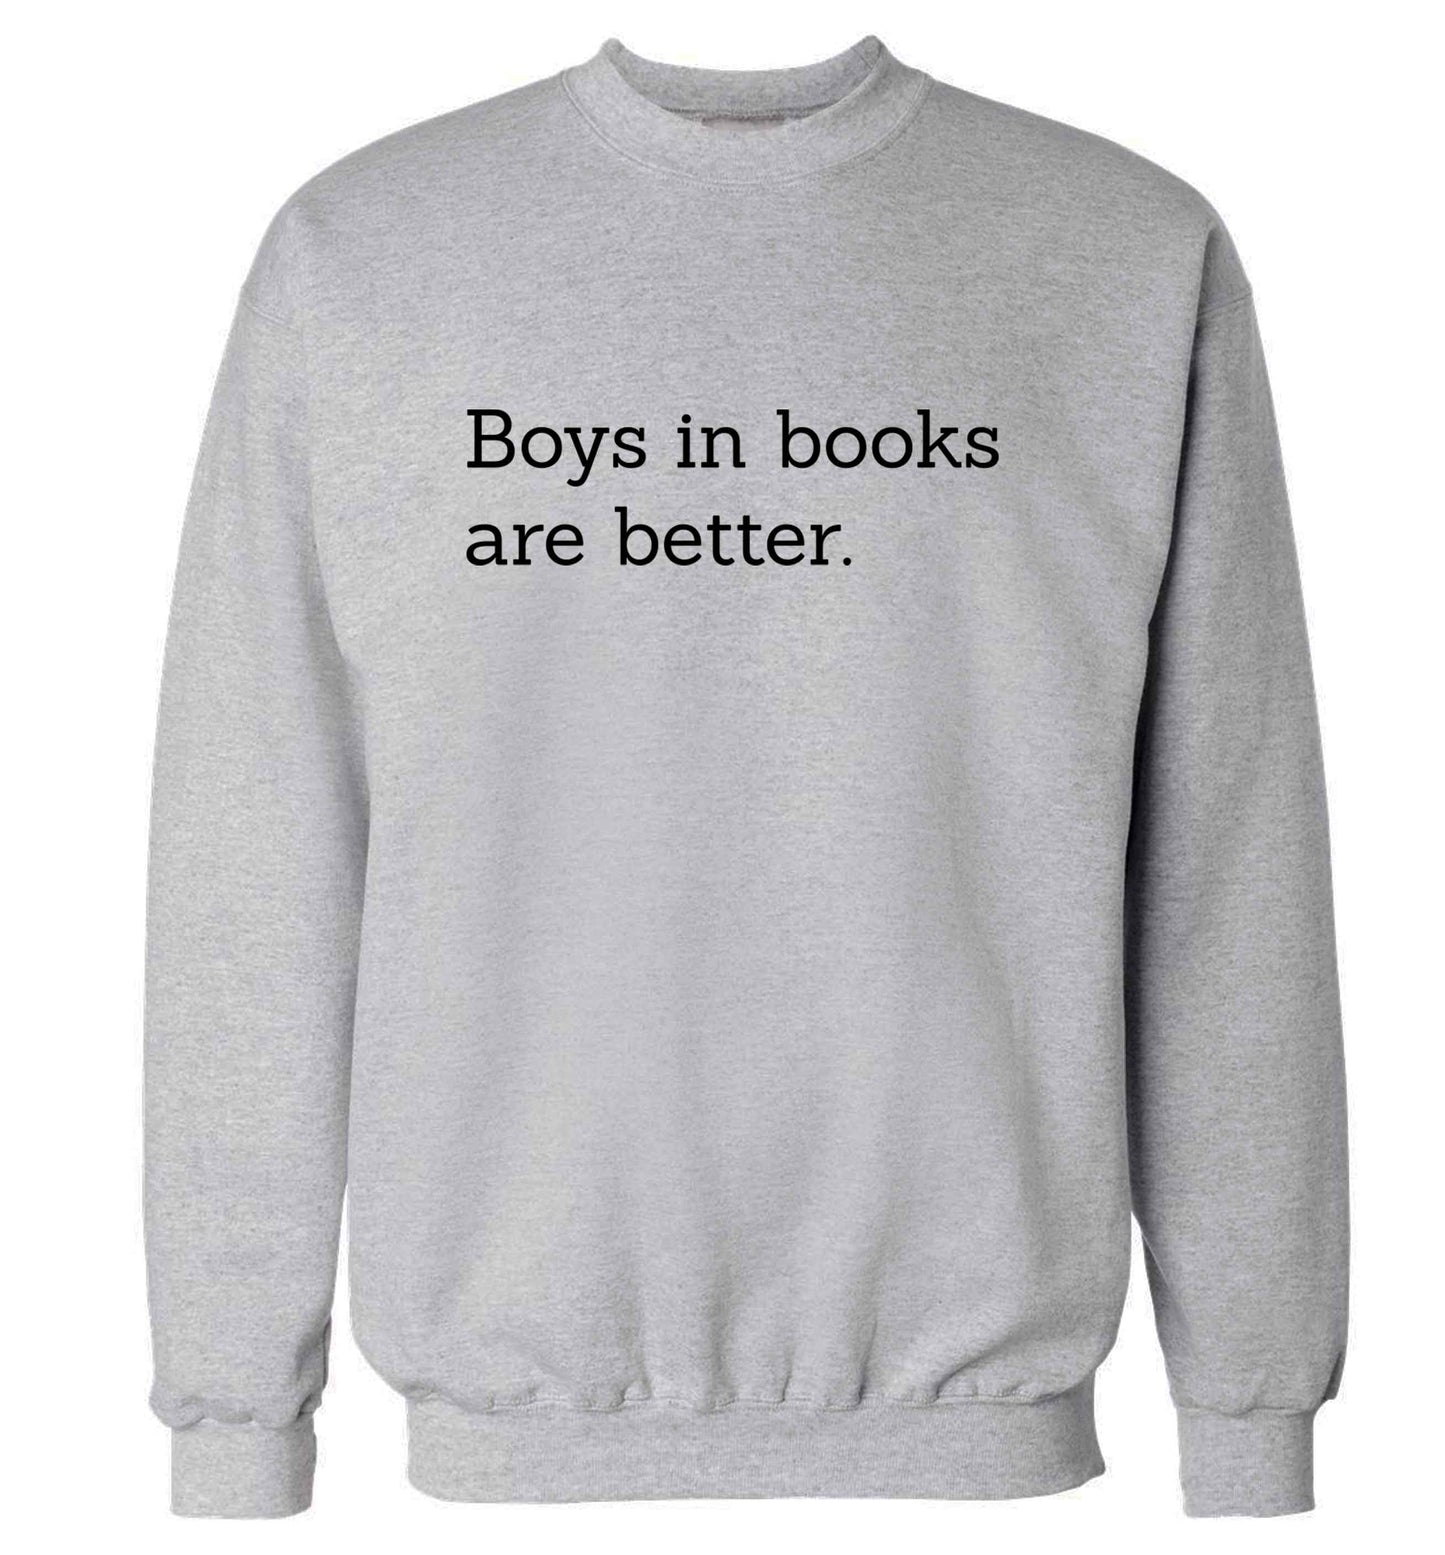 Boys in books are better adult's unisex grey sweater 2XL